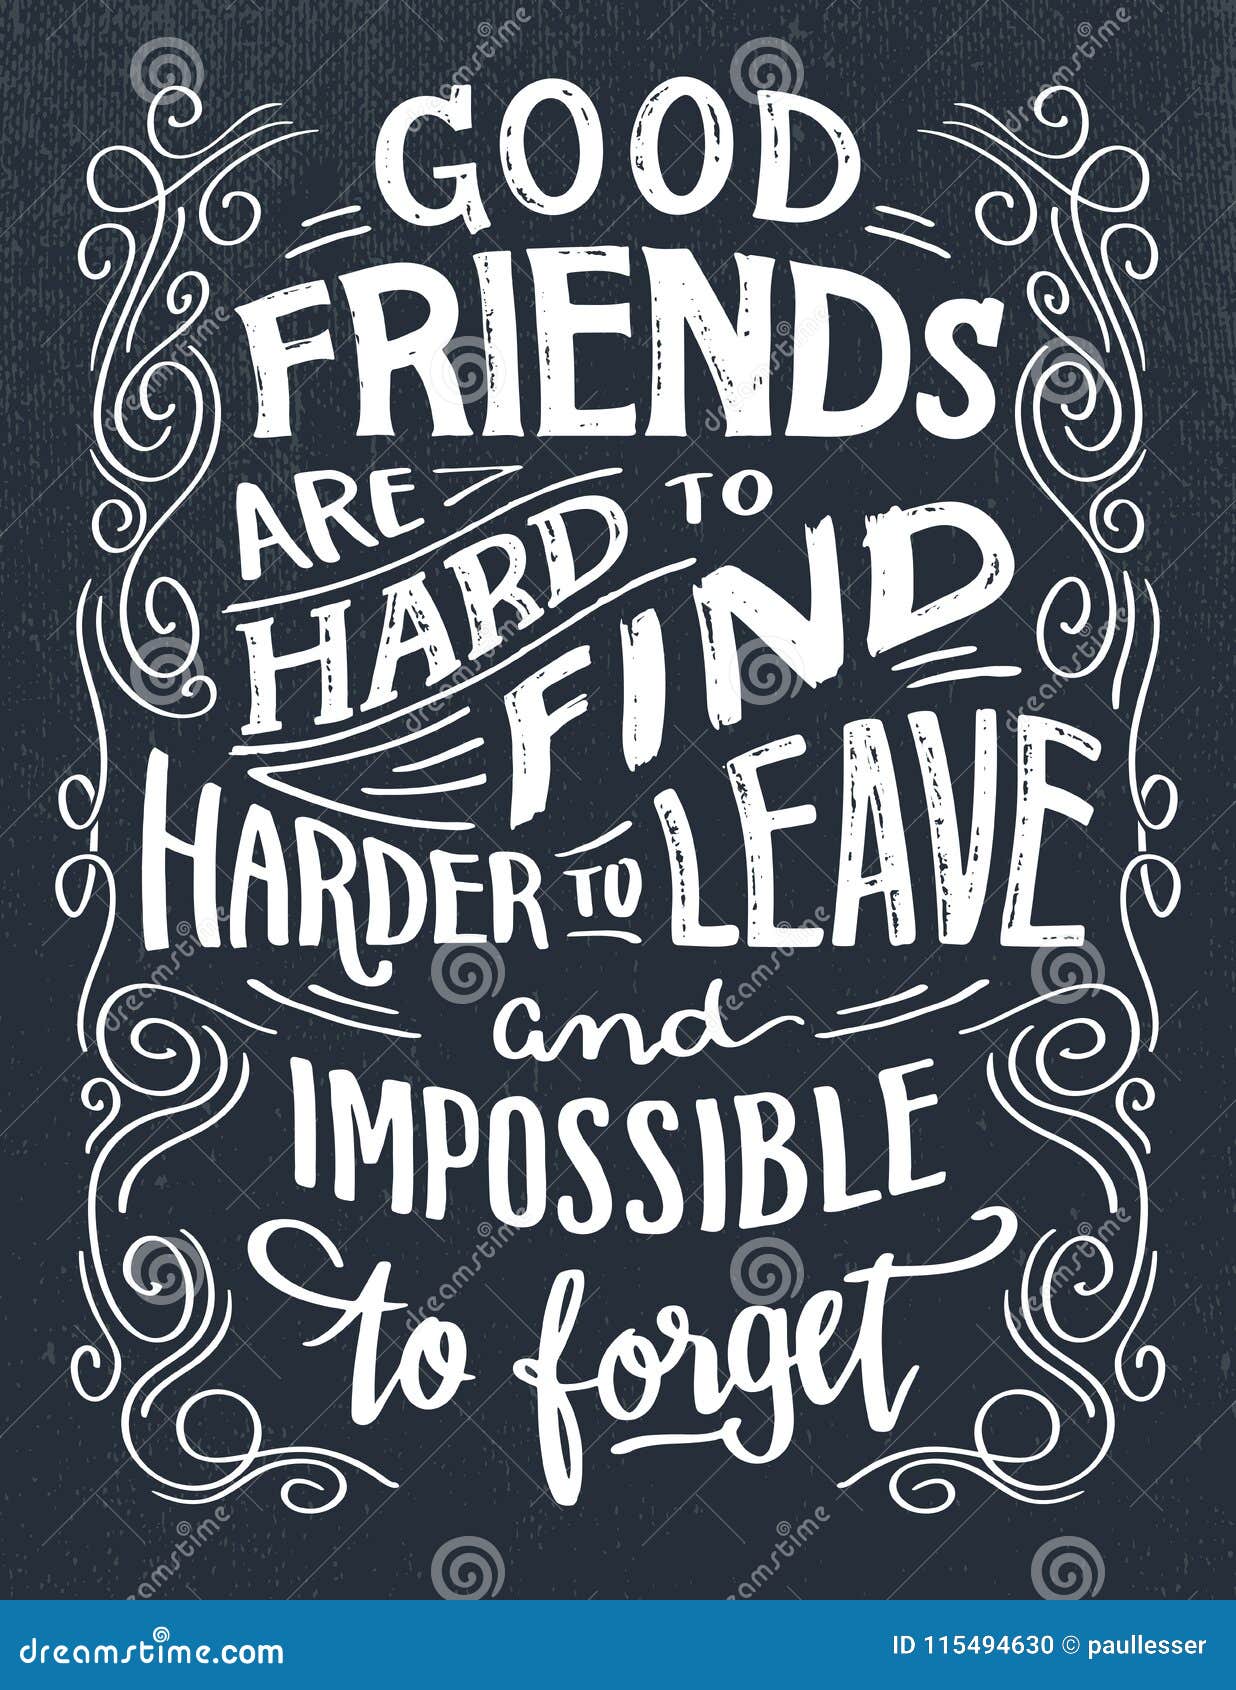 Good Friends are Hard To Find Quote Stock Vector - Illustration of ...